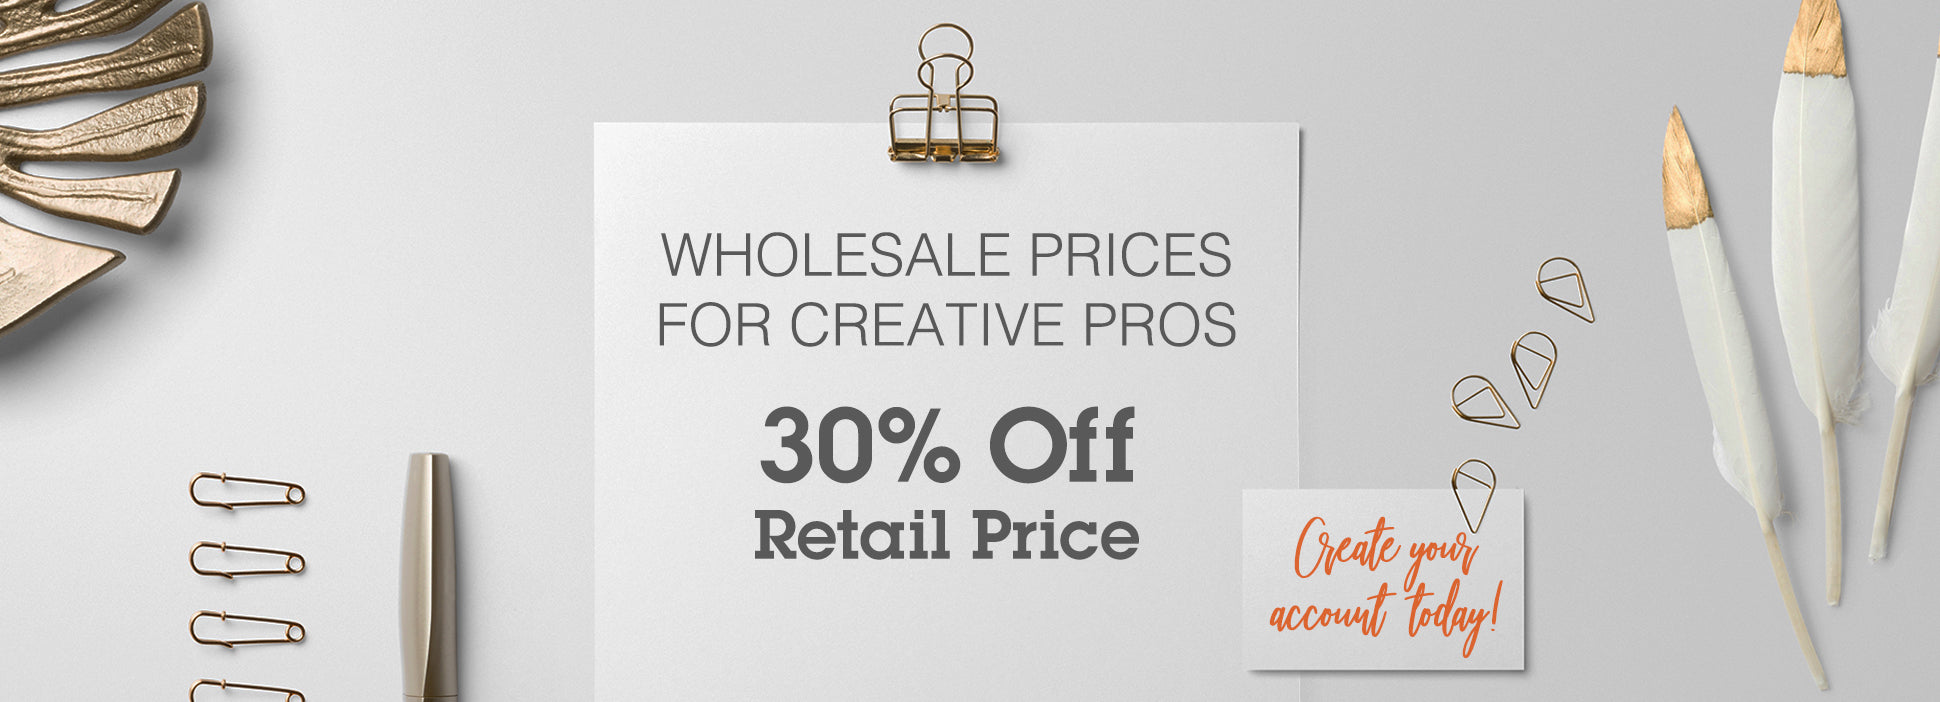 Wholesale prices for creative pros- 30% off retail price. Create your account today!